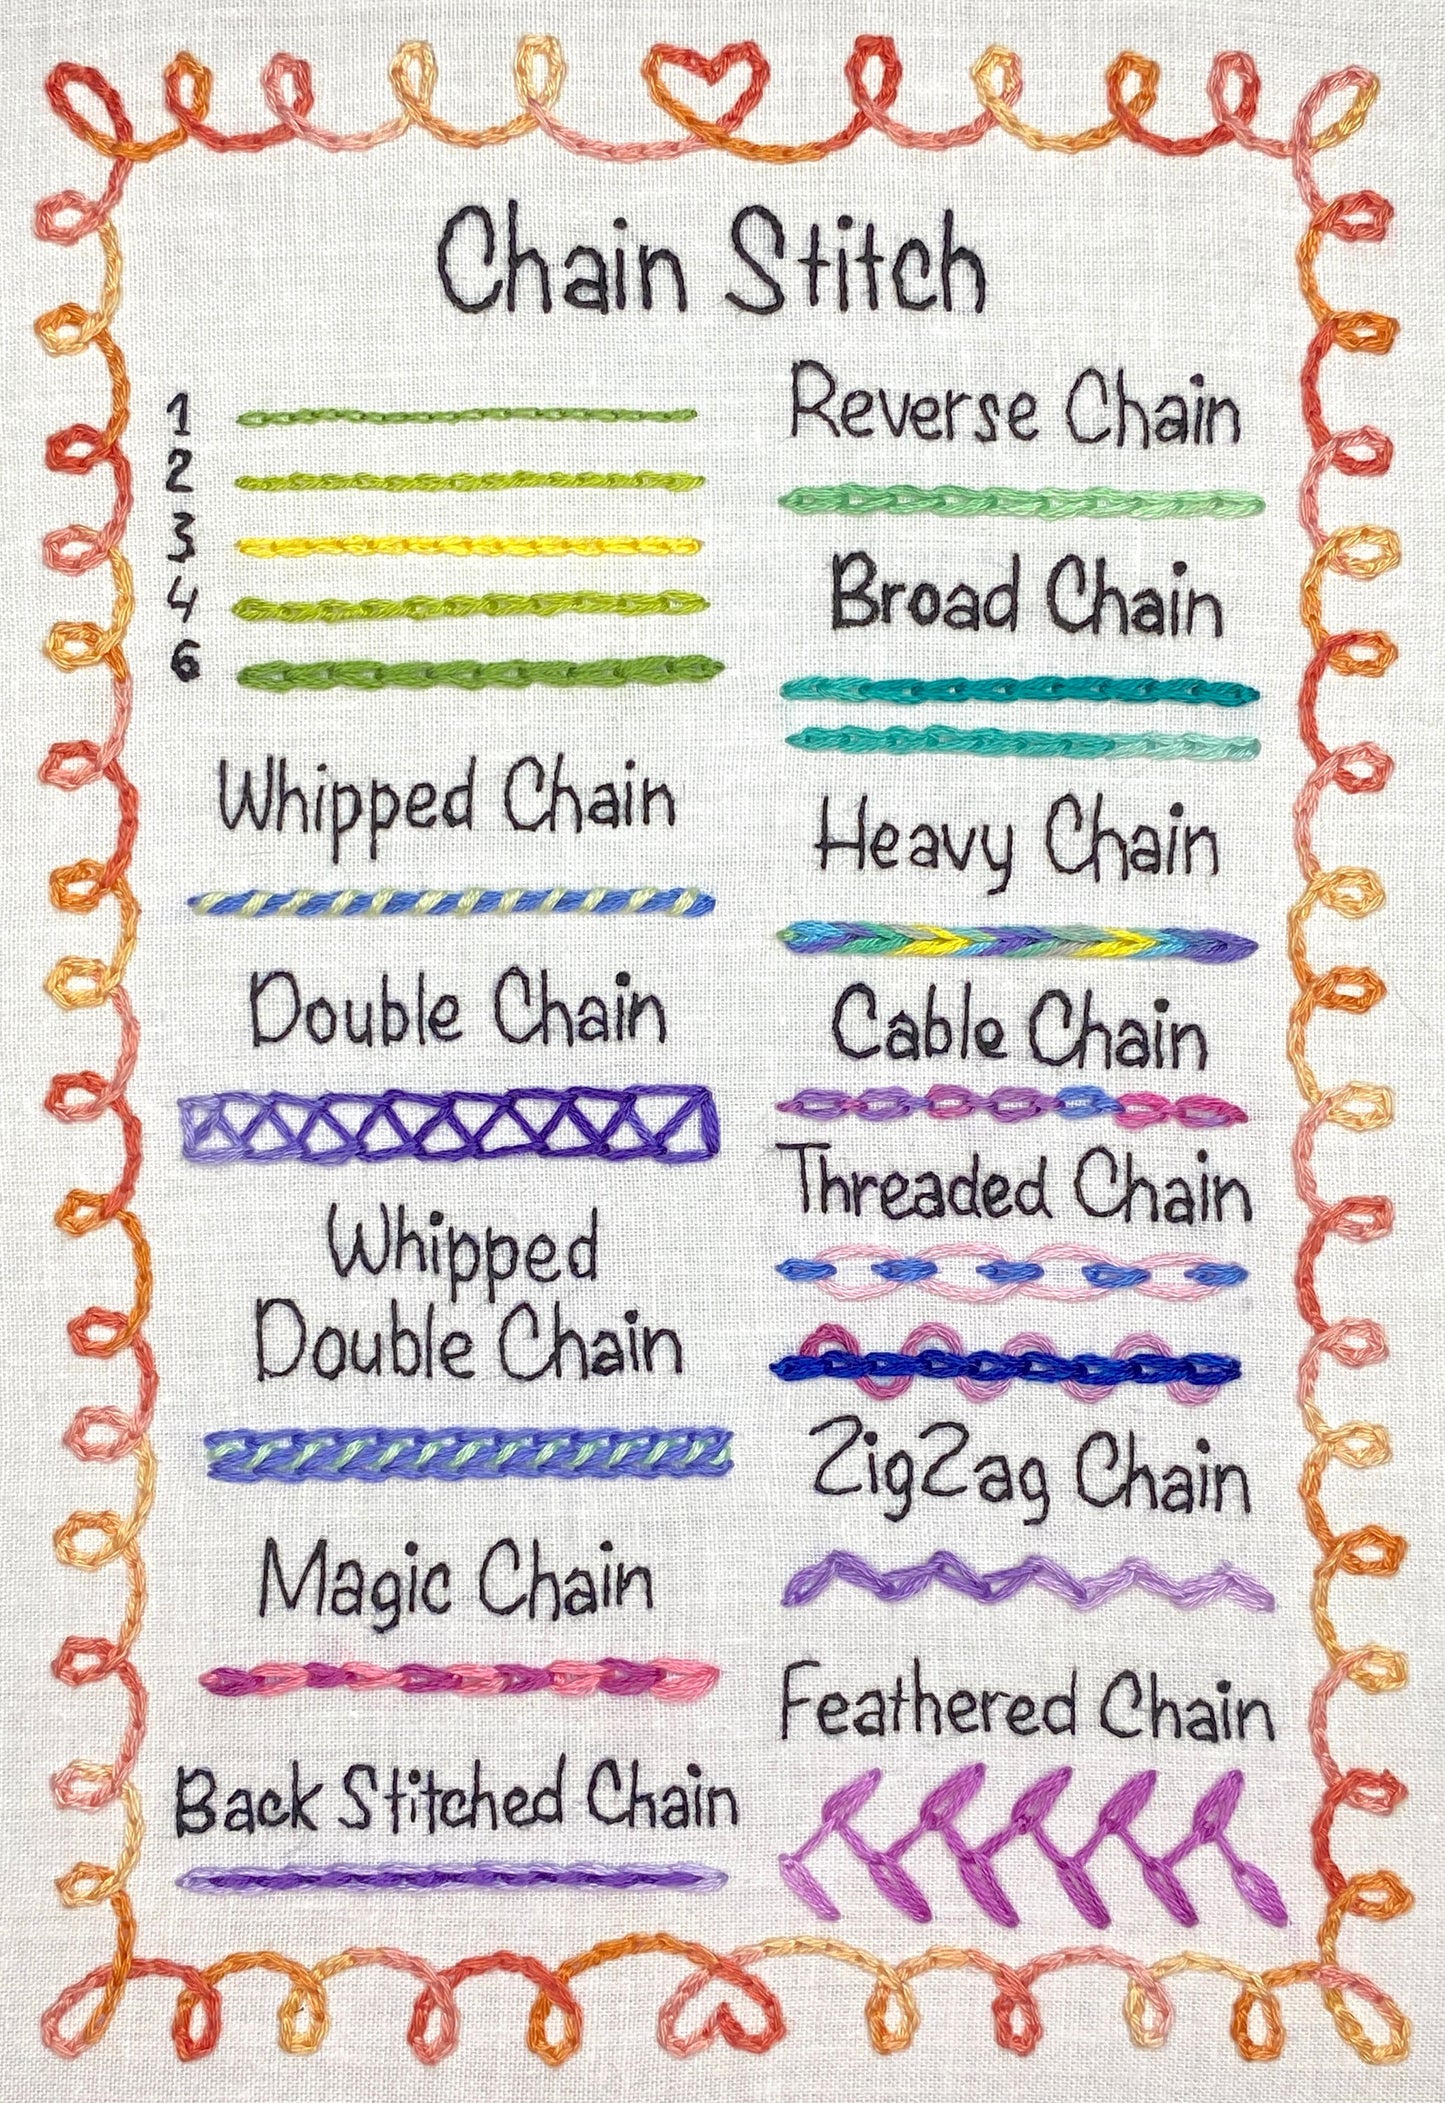 Chain Stitch Sampler Page for Beginners, Hand Embroidery PDF Pattern + Video Tutorials